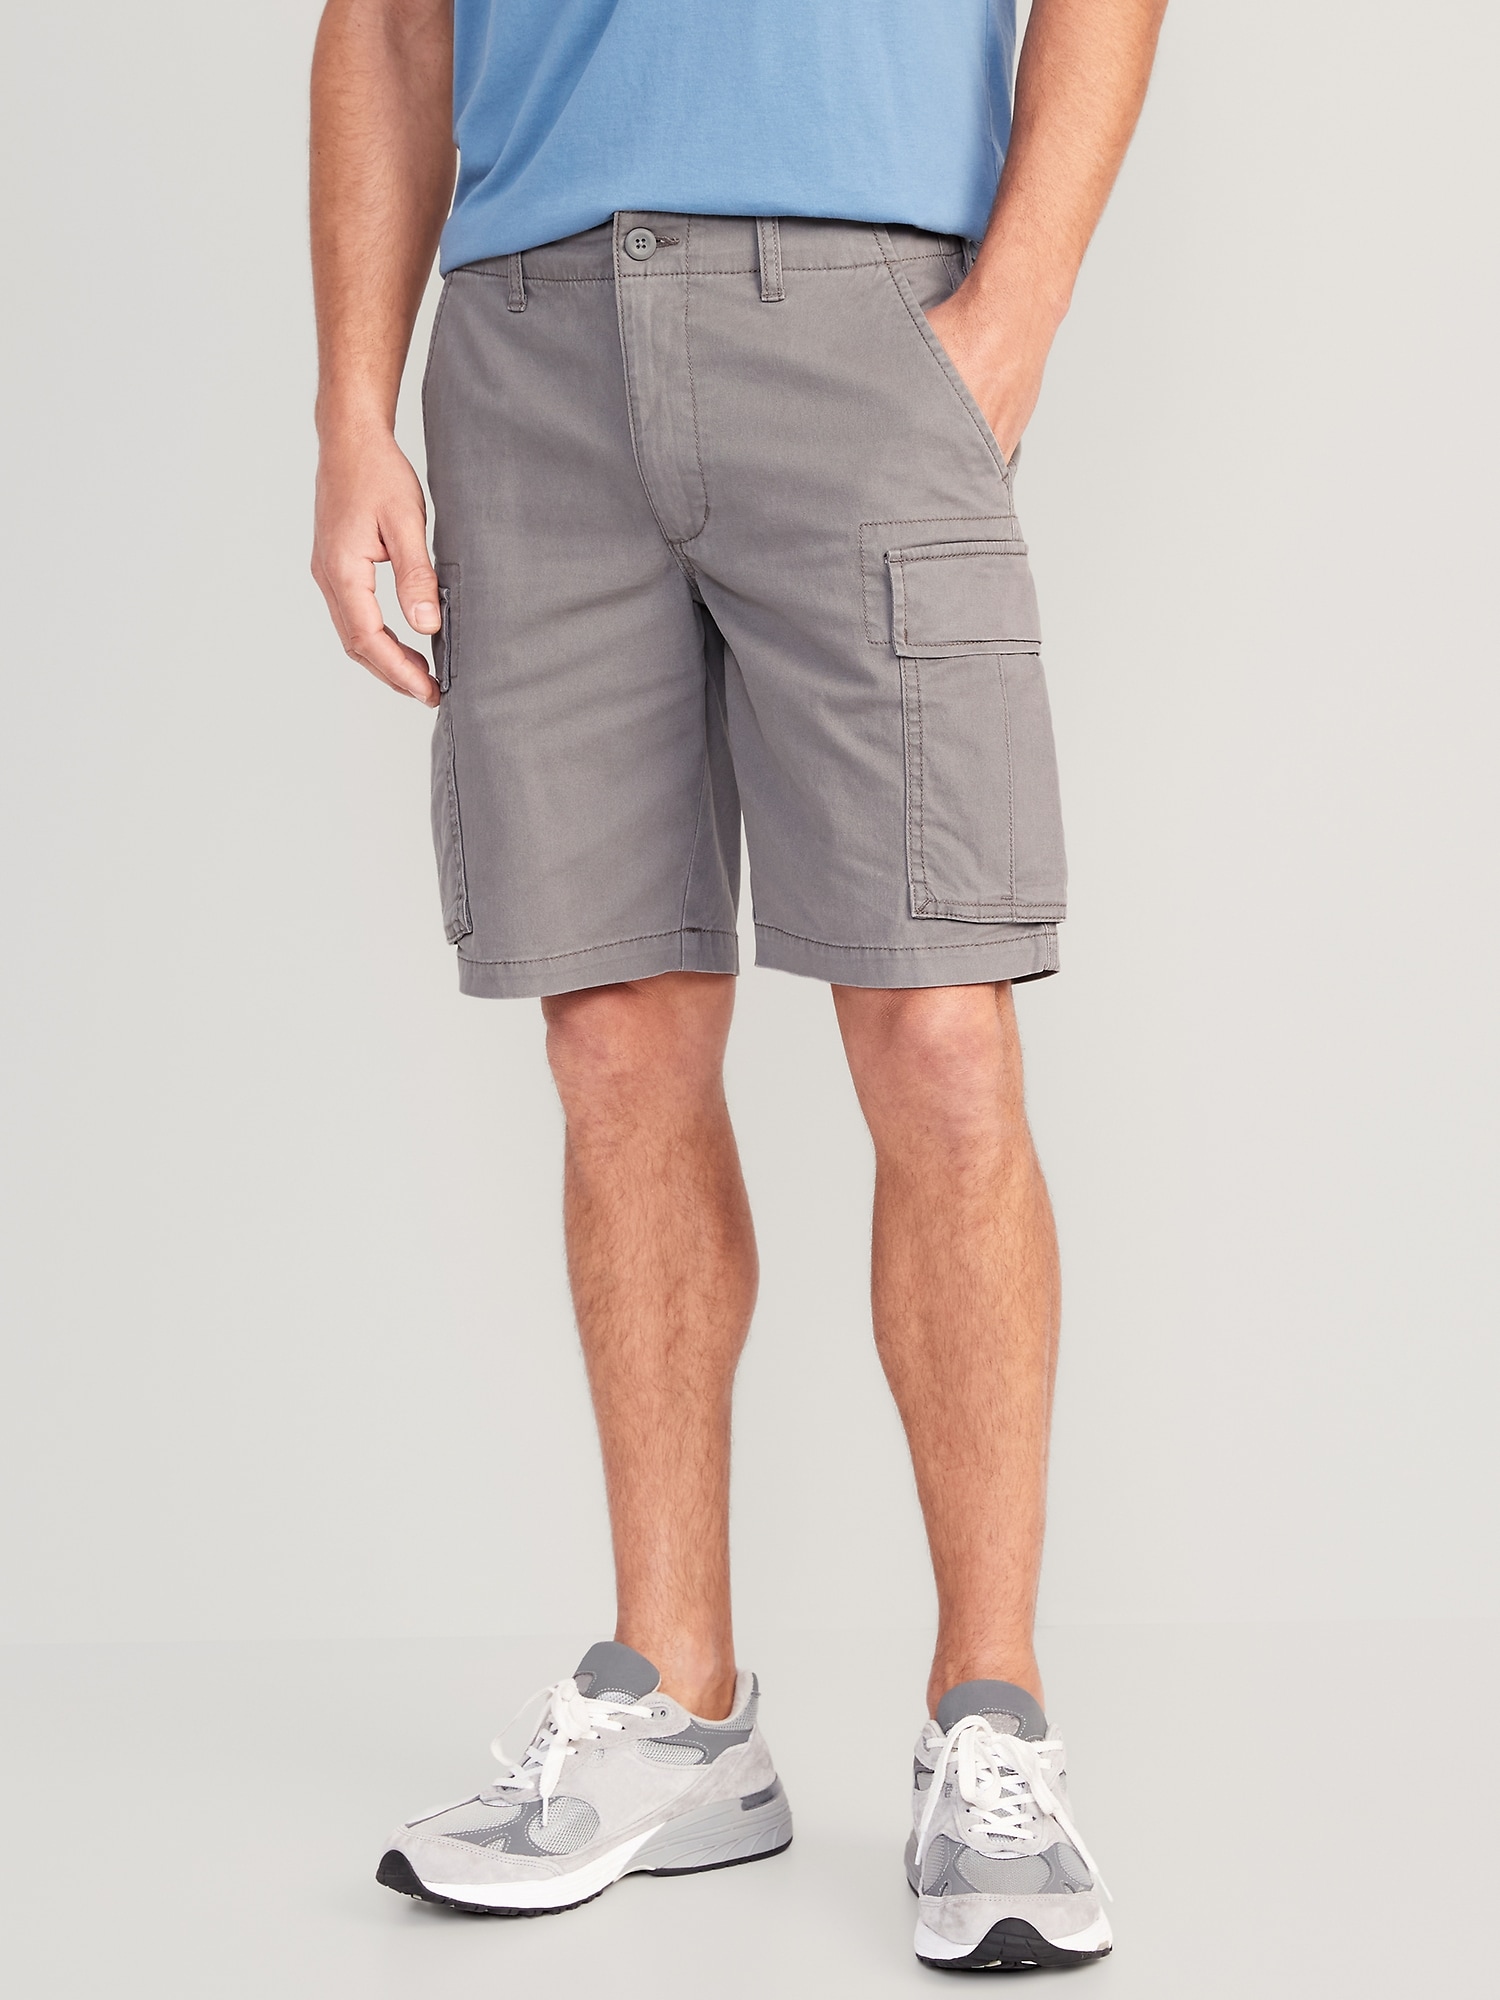 Relaxed Lived In Cargo Shorts 10 Inch Inseam Old Navy